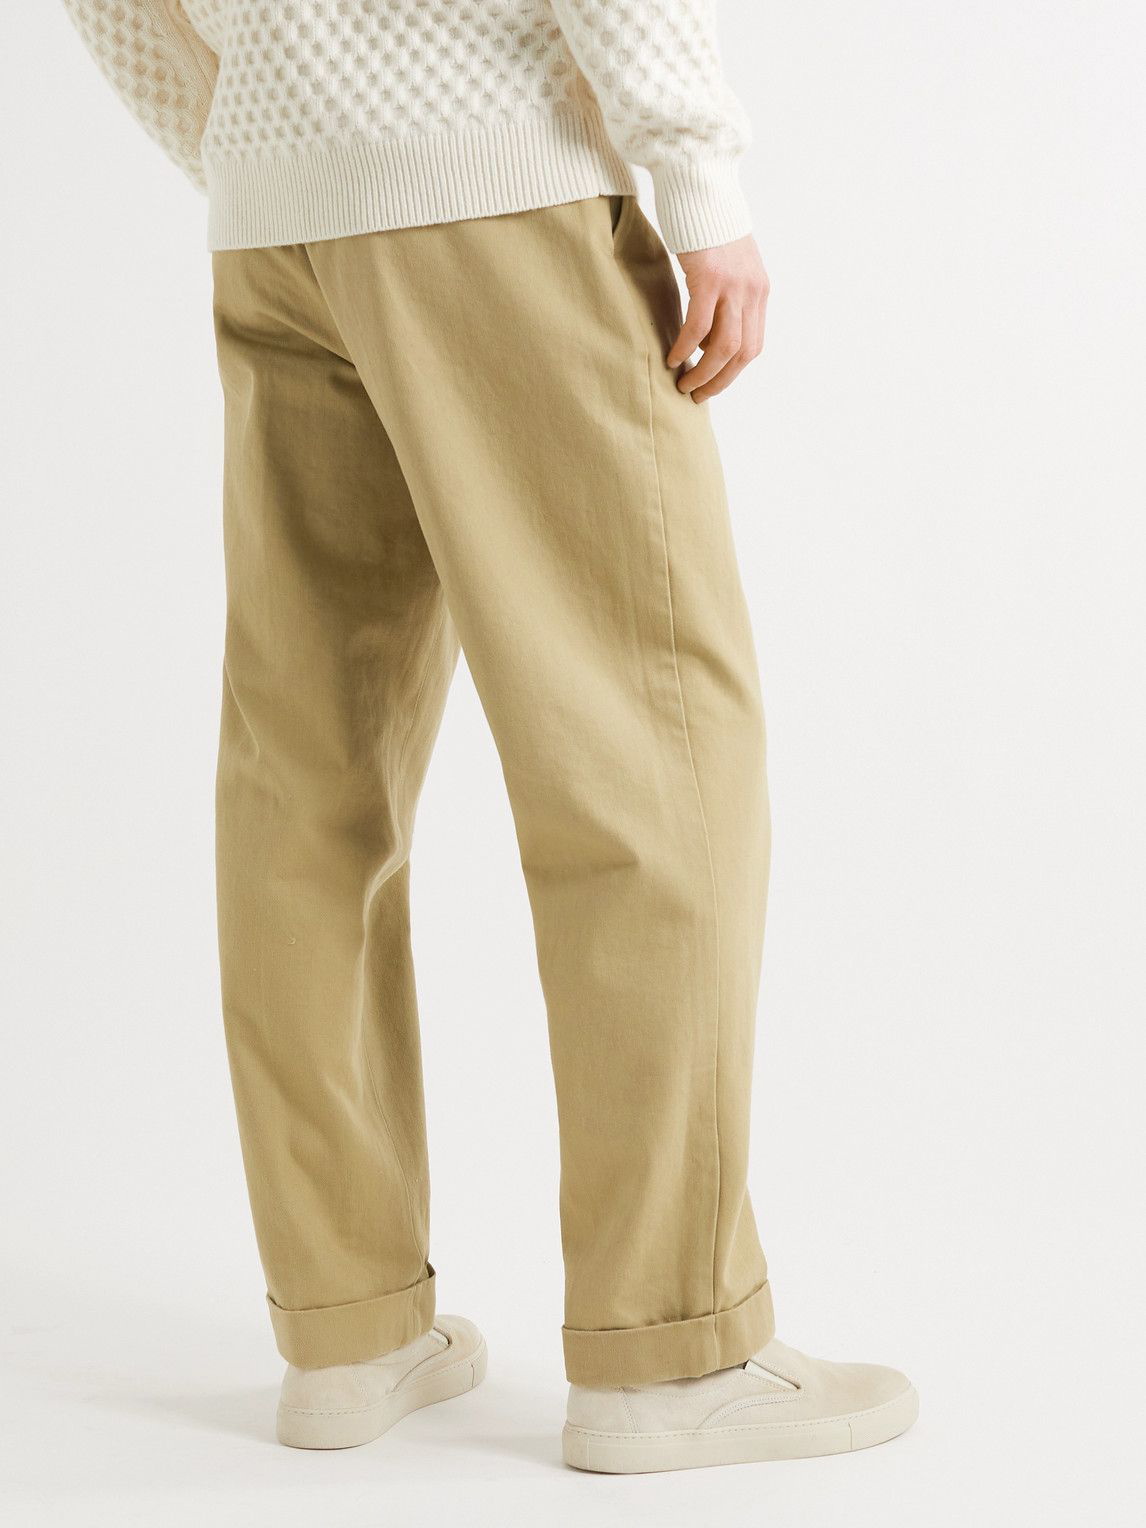 OFFICINE GÉNÉRALE Straight-Leg Belted Cotton-Twill Trousers for Men